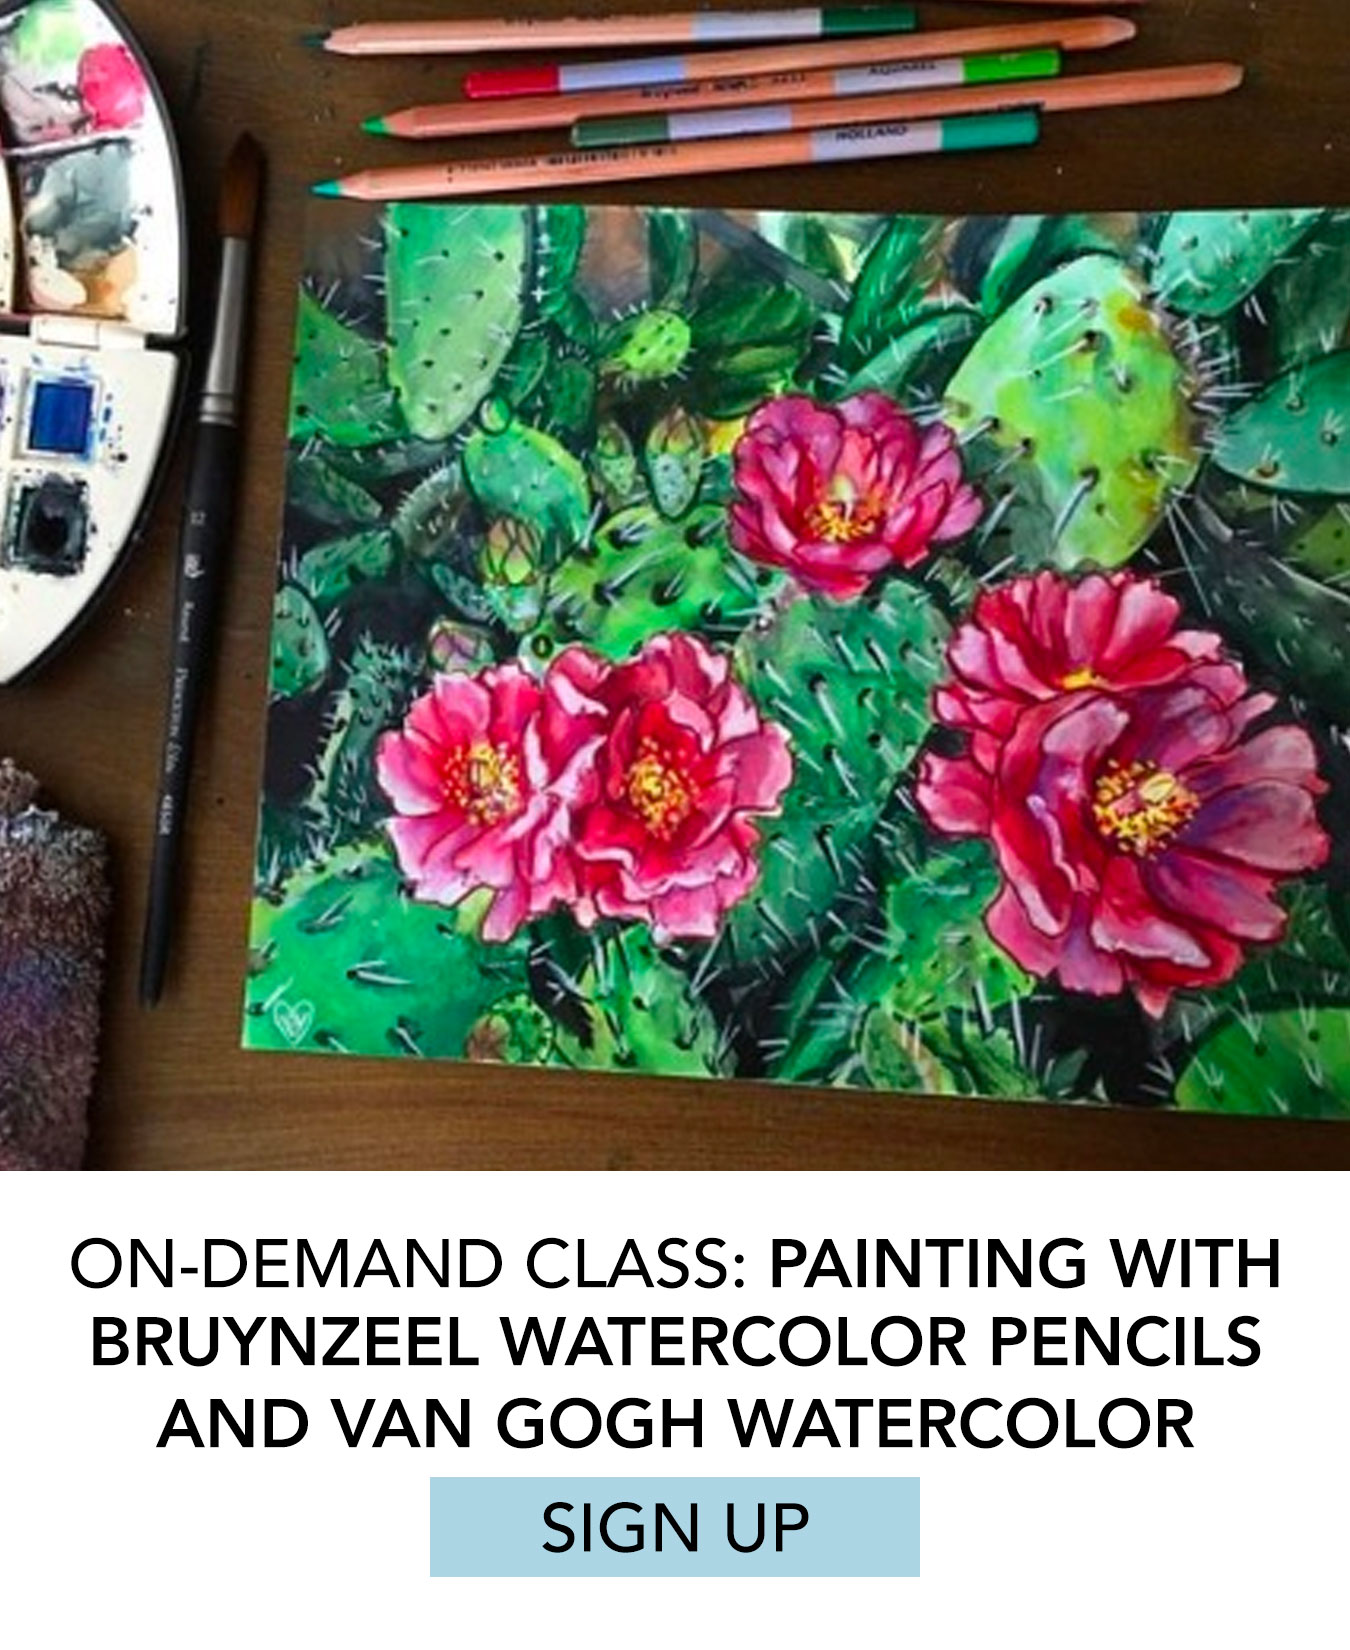 On-Demand Class: Painting with Bruynzeel Watercolor Pencils and Van Gogh Watercolor. Click to Sign Up.